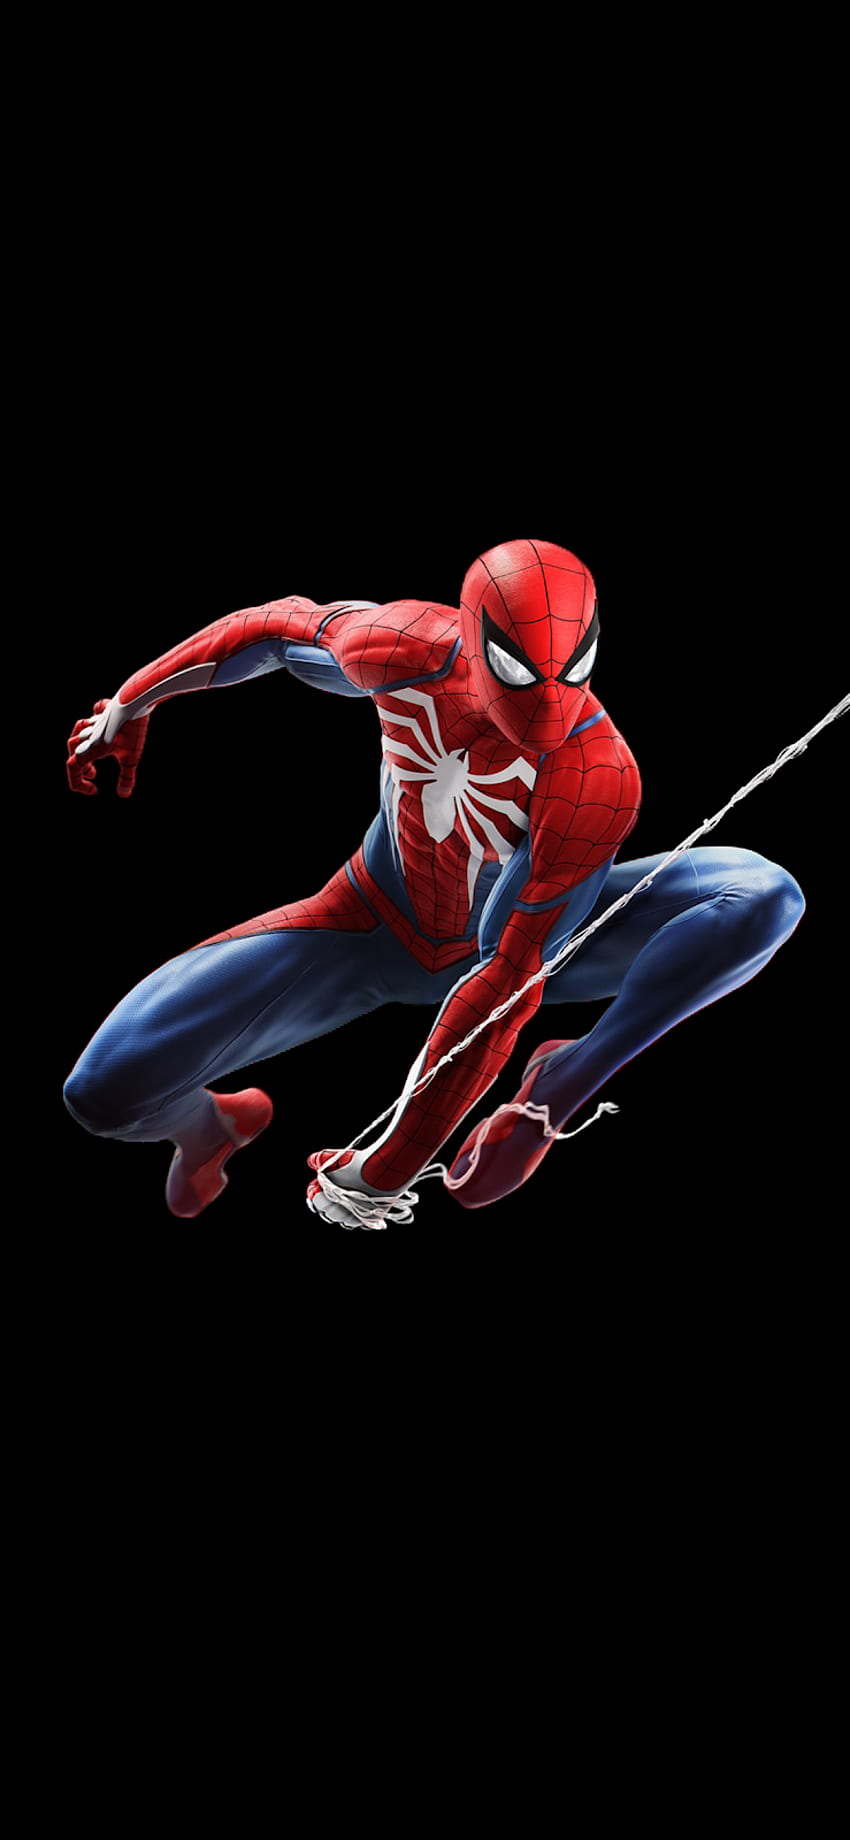 Spider Man V2 [iPhone X] Saving Battery For Amoled Display, Spider-Man Cell HD phone wallpaper